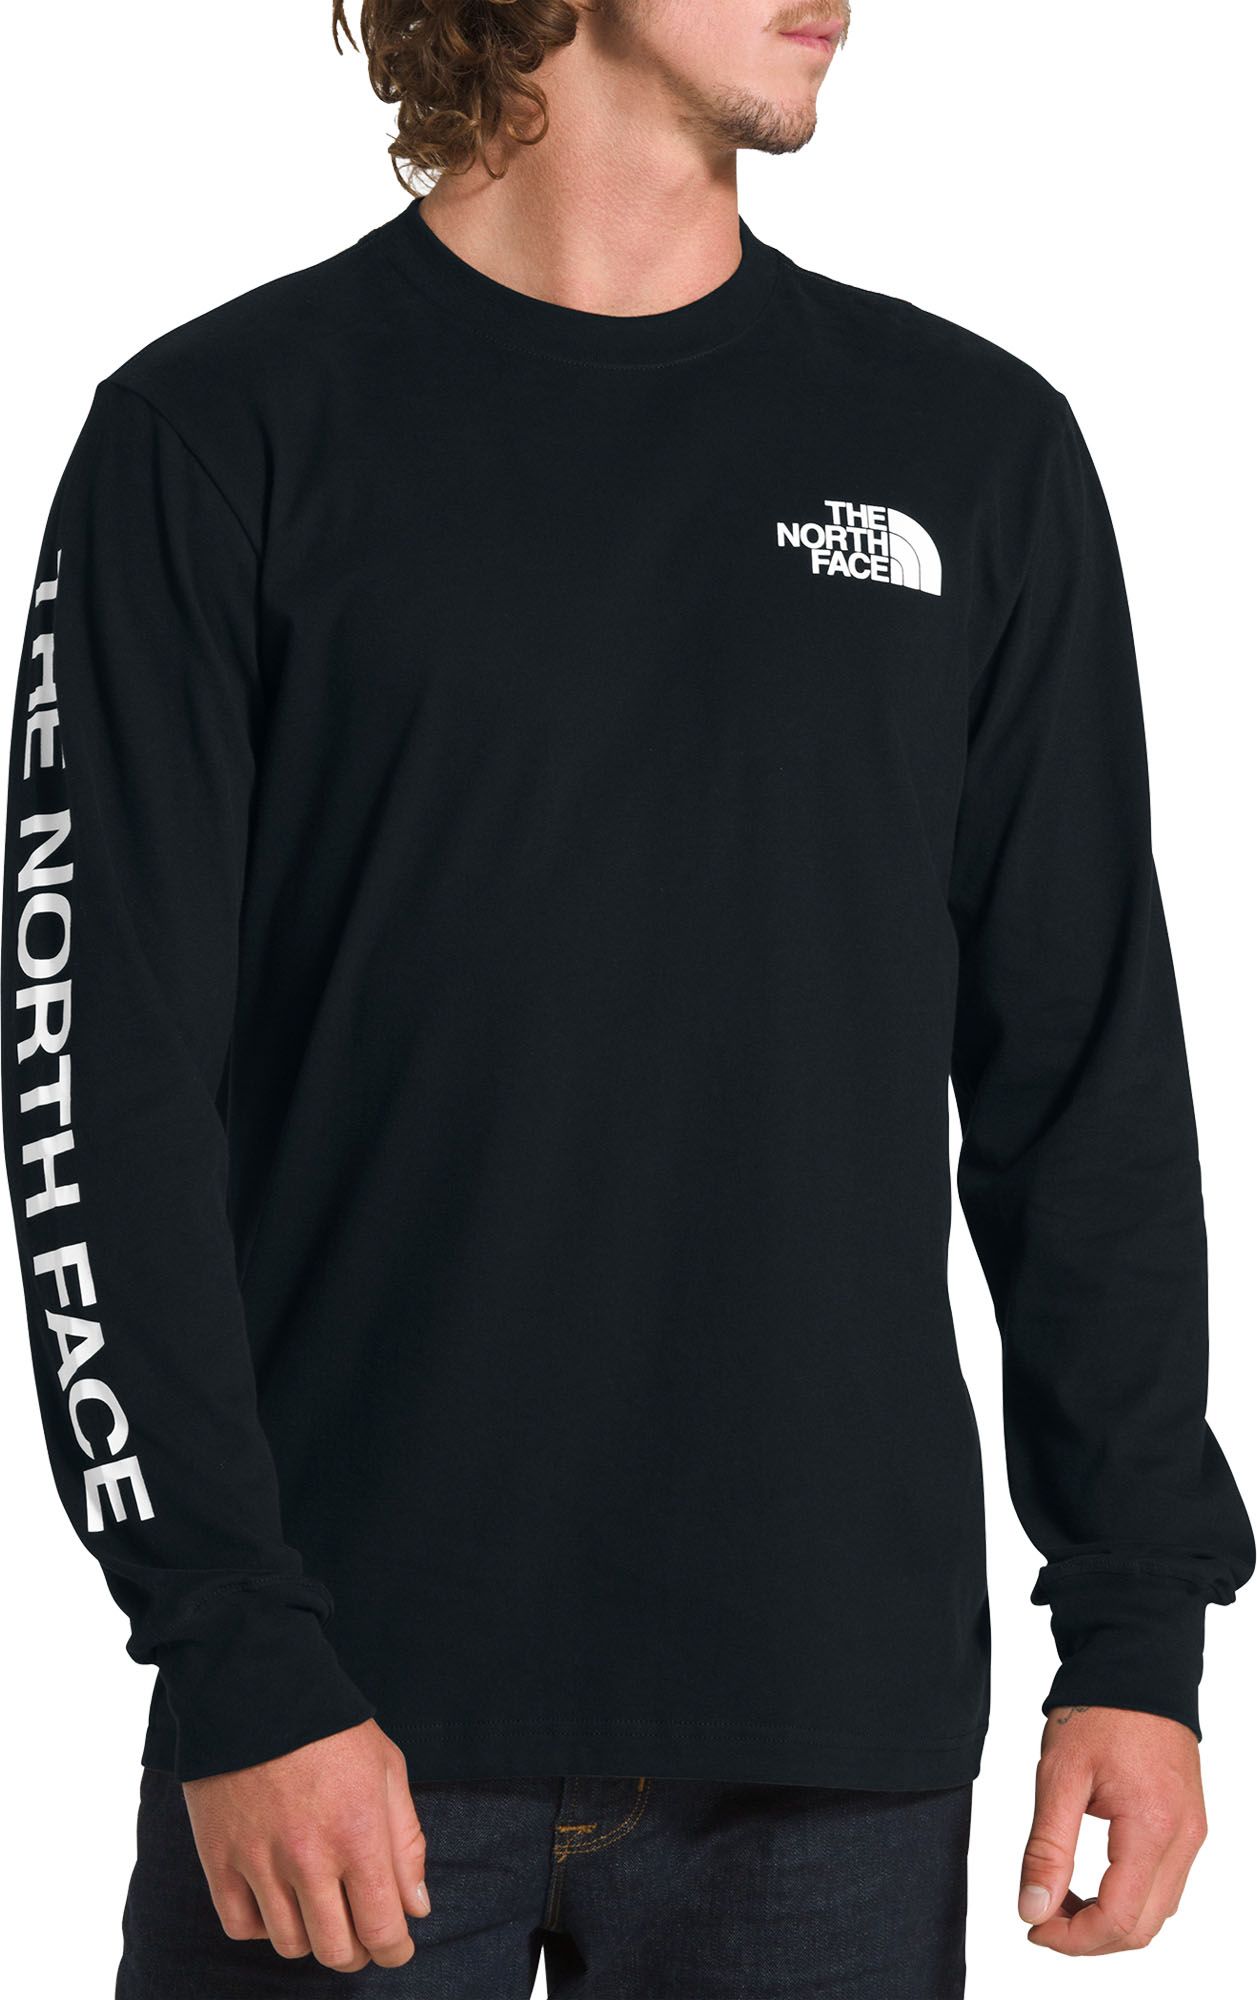 The North Face Men's Long Sleeve Shirt Online Store, UP TO 59% OFF 